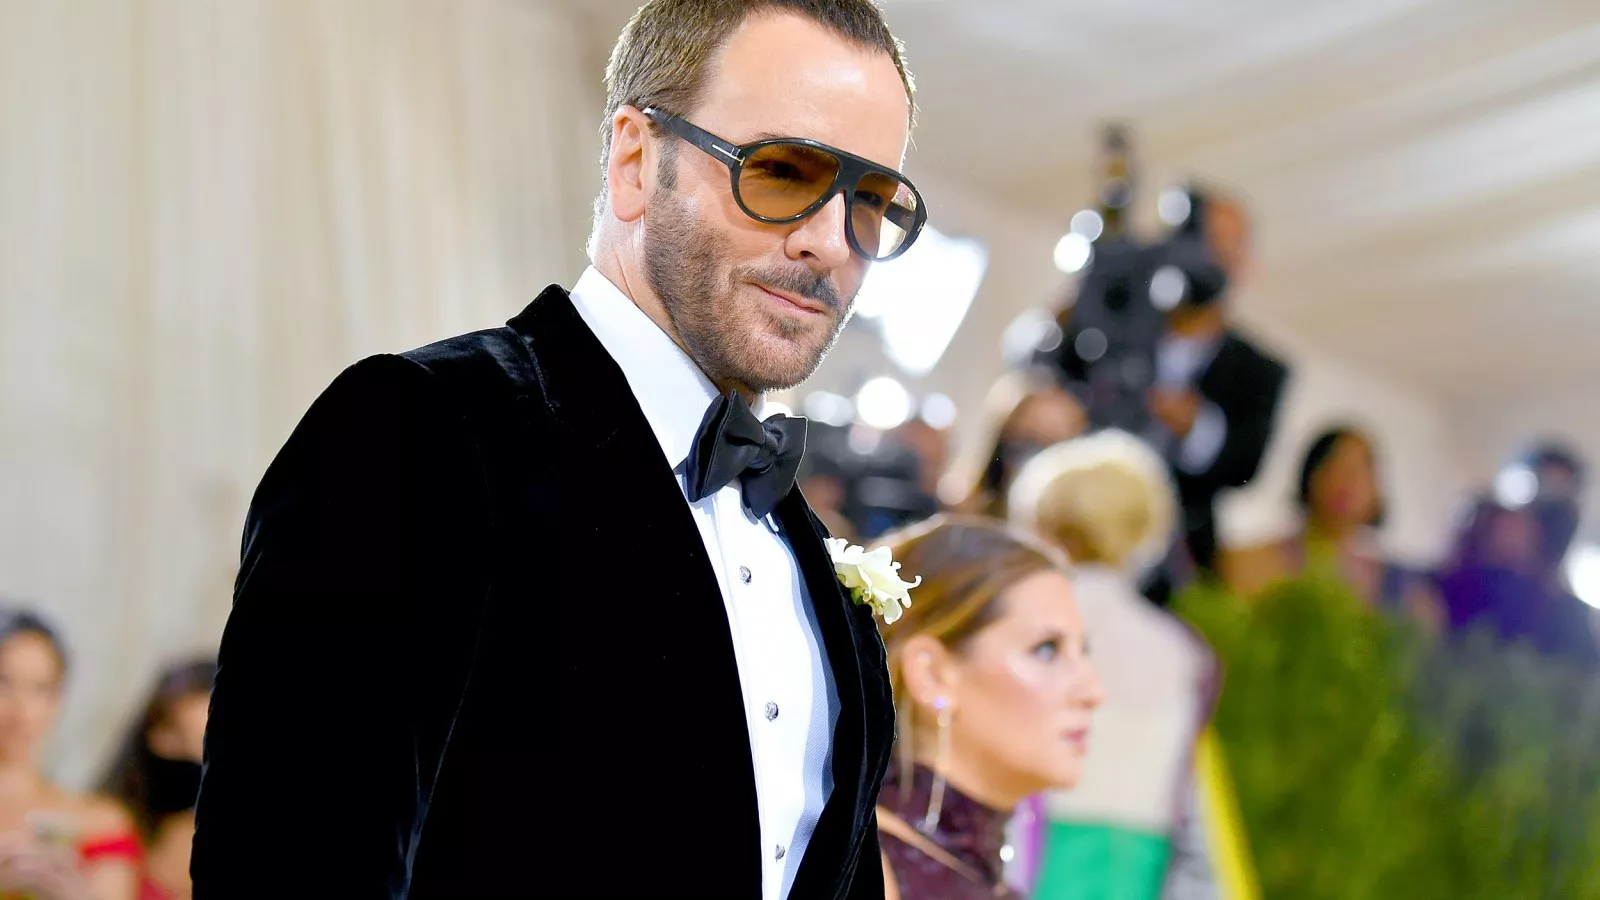 The Most Famous Gucci Tom Ford Pieces (With Images)